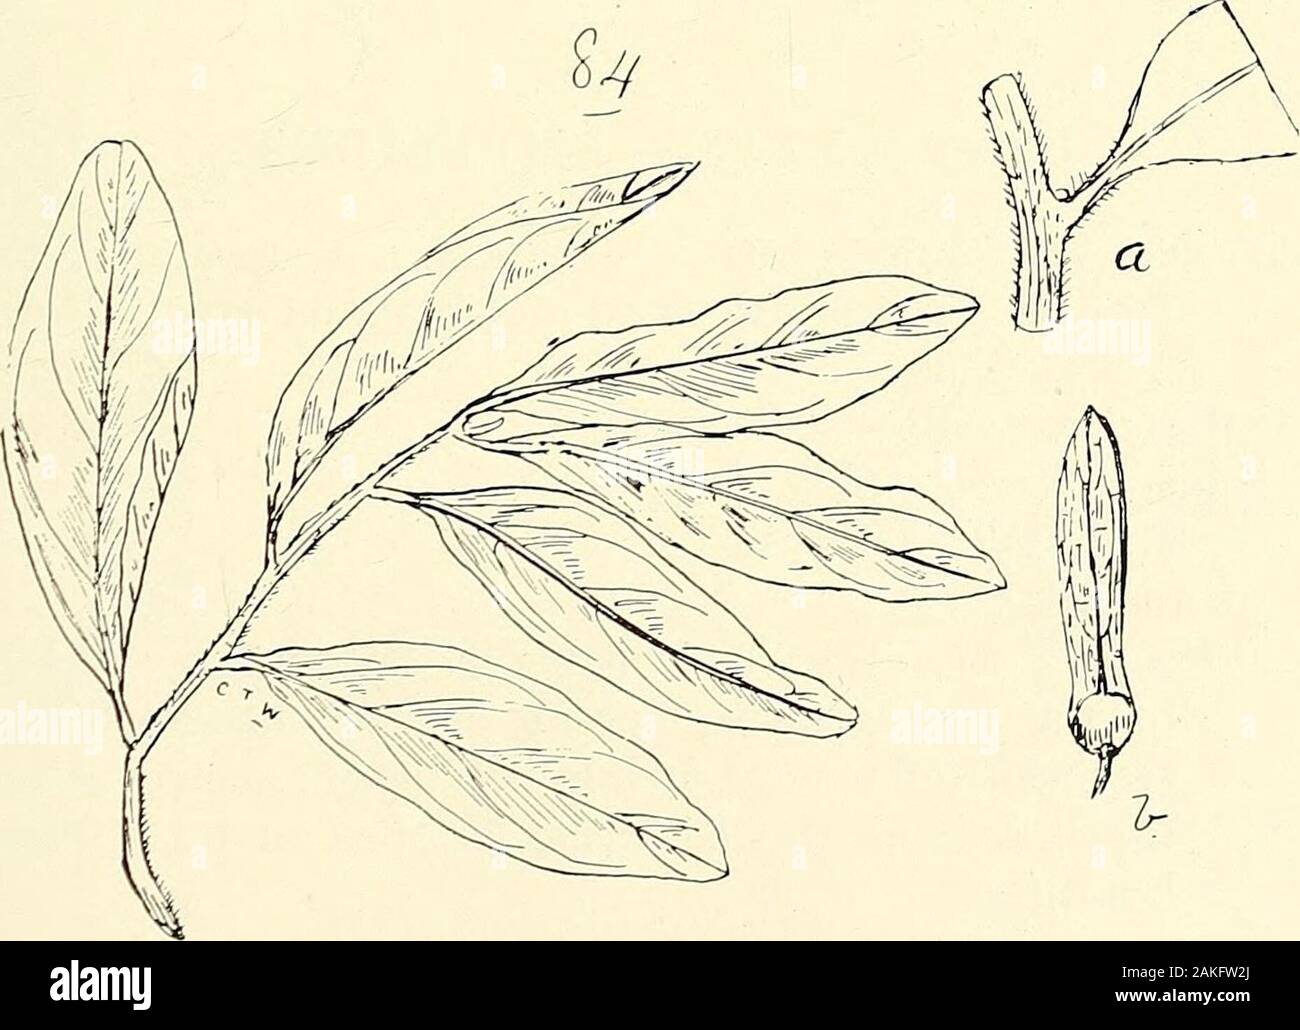 Comprehensive catalogue of Queensland plants, both indigenous and naturalisedTo which are added, where known, the aboriginal and other vernacular names; with numerous illustrations, and copious notes on the properties, features, &c., of the plants . .&gt;7/i/ney (fin-) 83. Macgregoria racemigera, F. v. M.. 84. Ventilago ecorollata, F. v. M. (a) Portion of a branchlet enl., (b) nut with its appendage (winj 106 XXXIX. AMPELIDEjE. Emmenospermum, F. v. M. alphitonioides, F. v. M.— Jingull of Cairns natives. Cunninghamii, Benth.Pomaderris, Lab ill. elliptica, Labill. lanigera, Sims. ferruginea, Sie Stock Photo